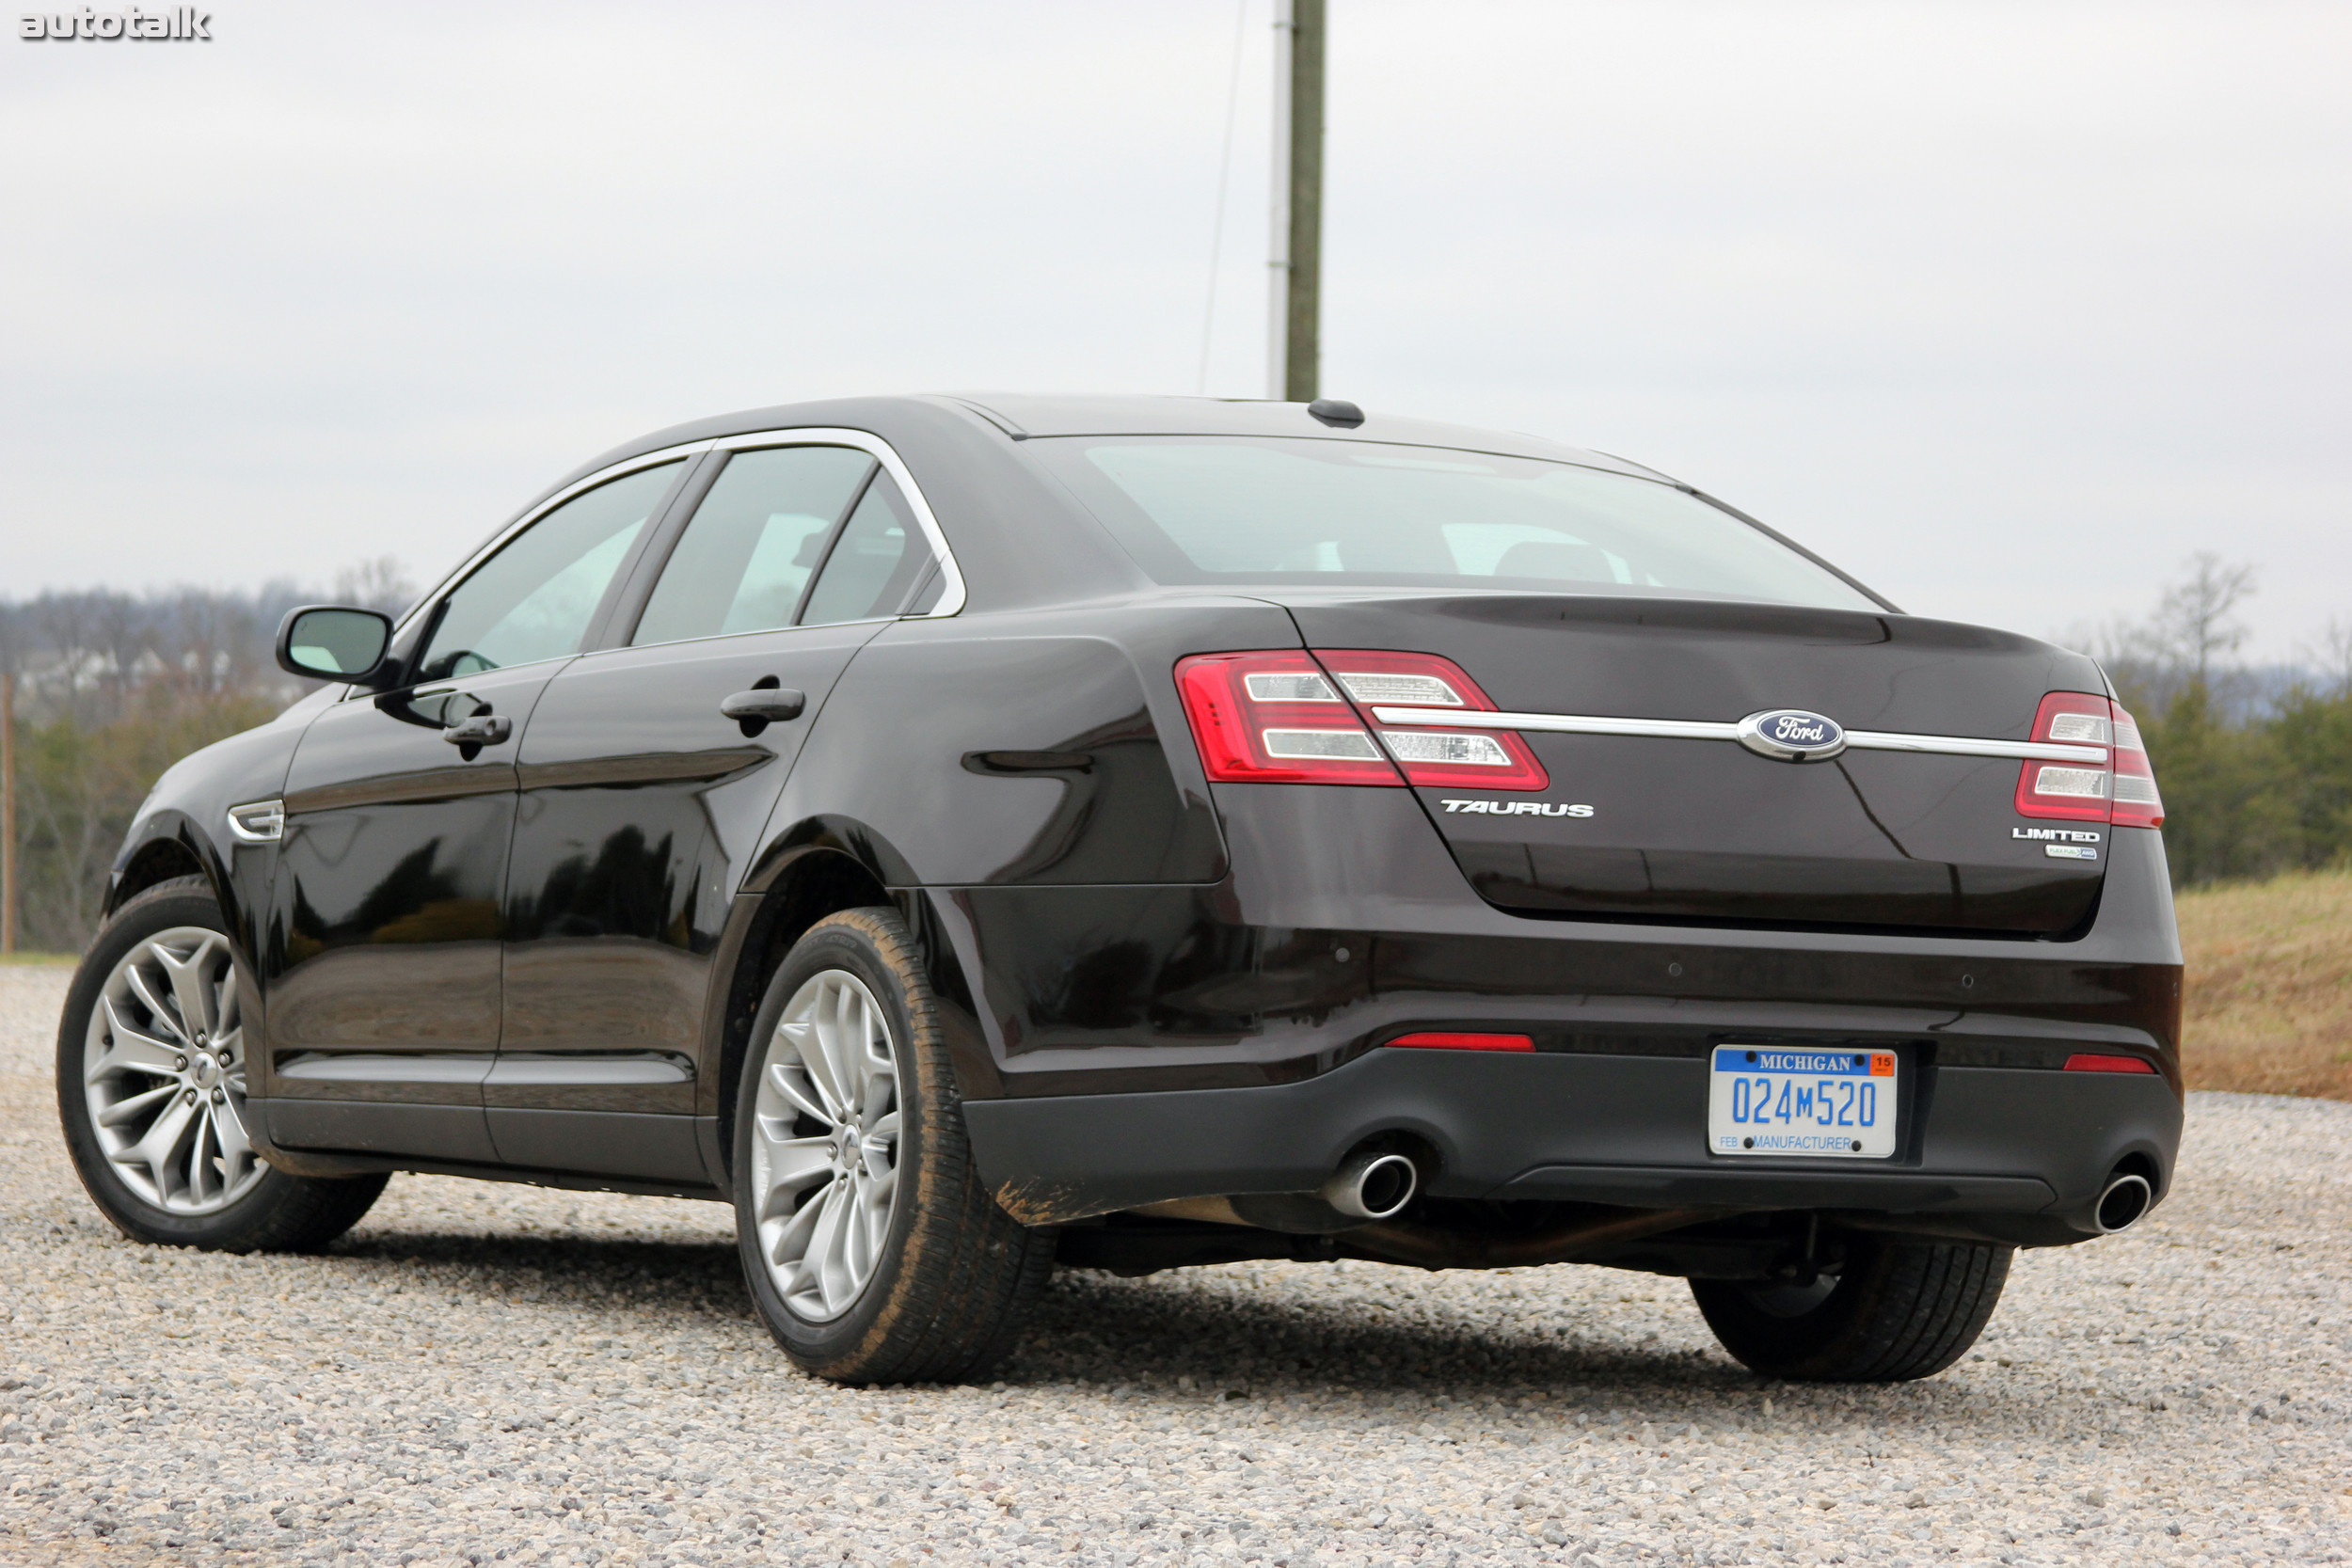 2013 Ford Taurus Review